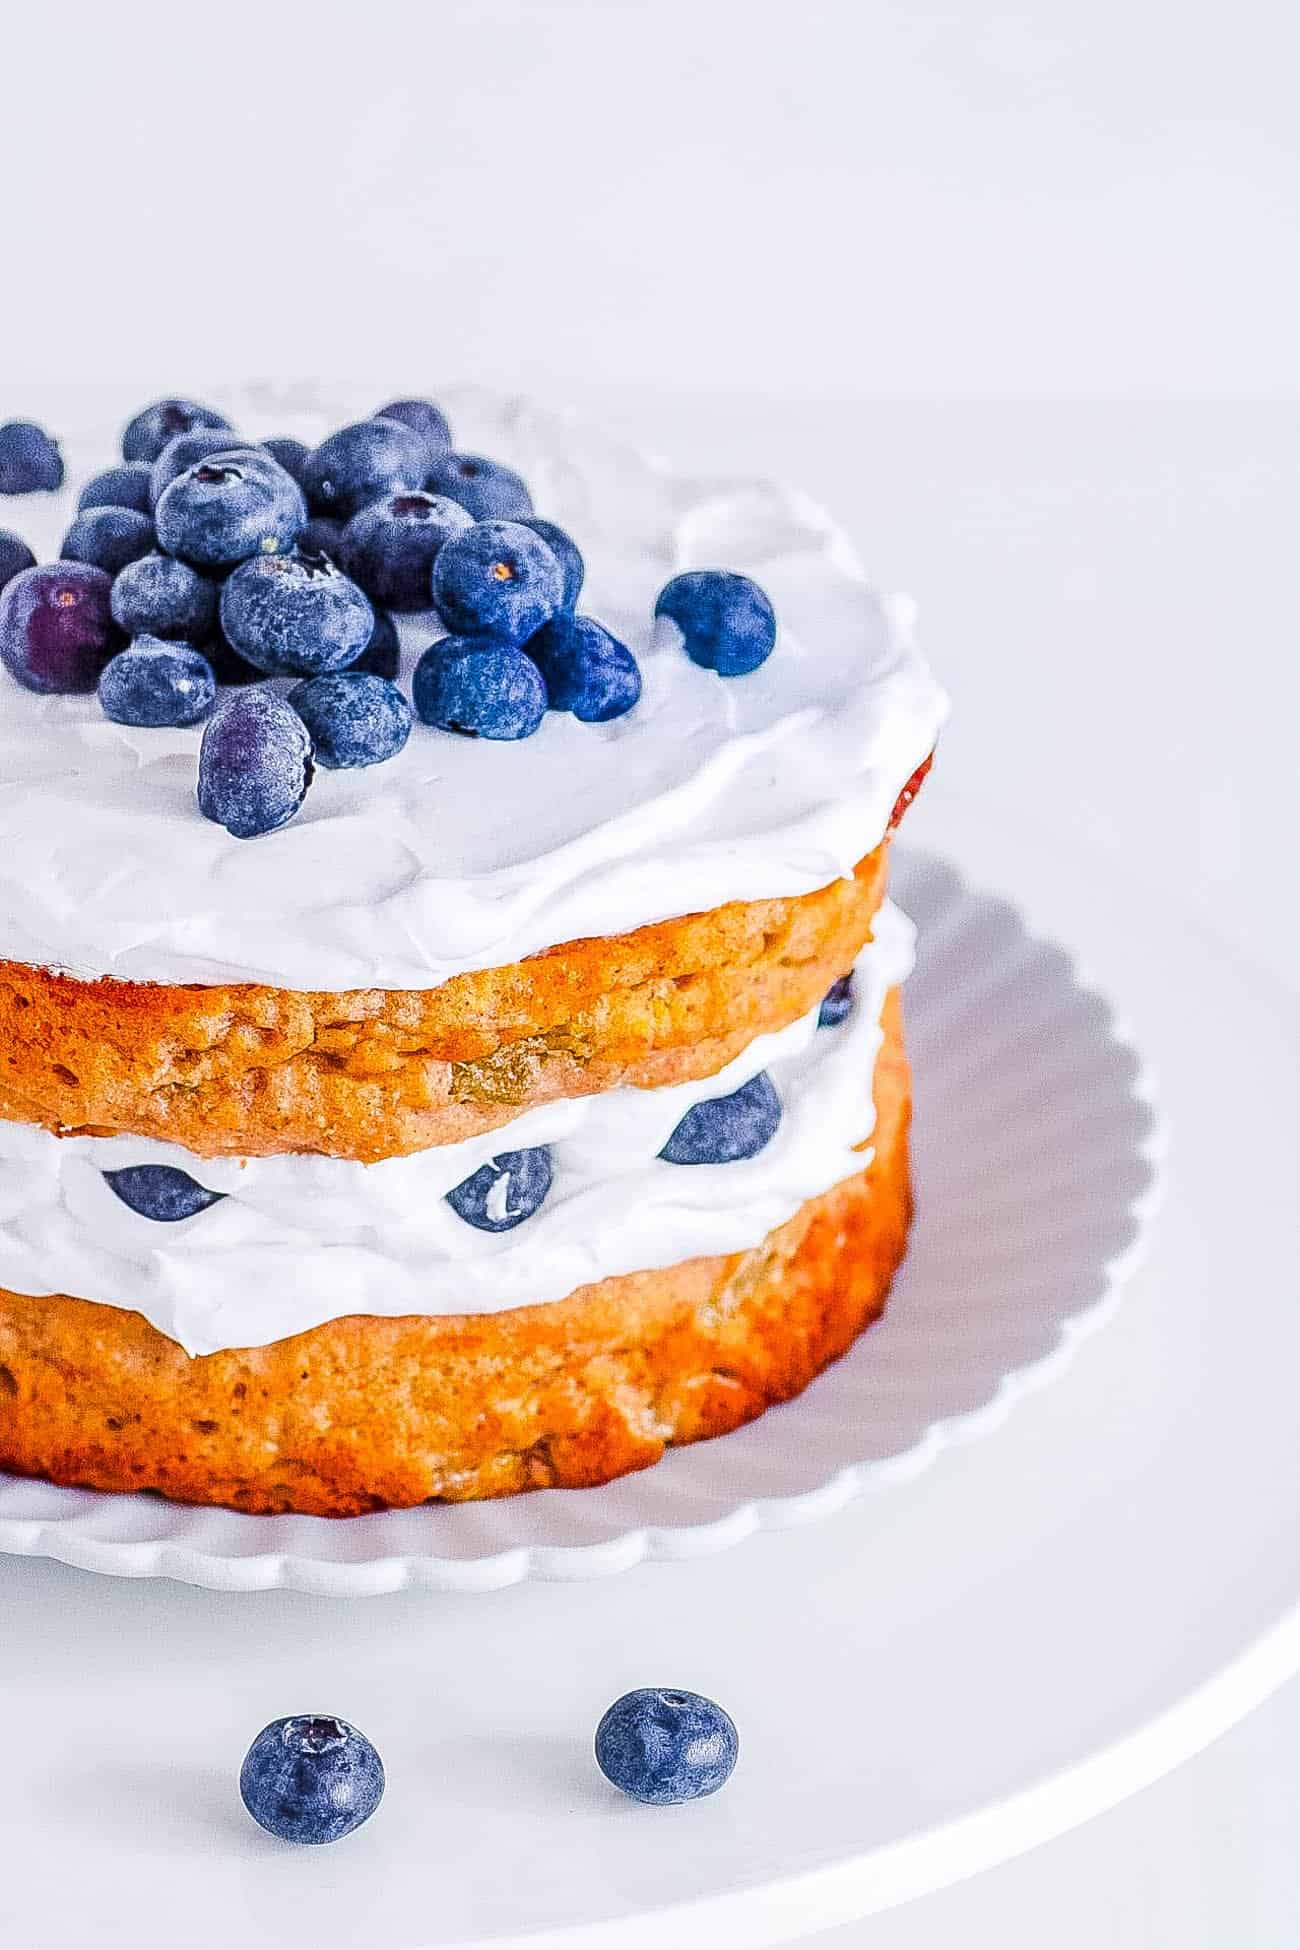 A healthy smash cake decorated with blueberries on a white plate.